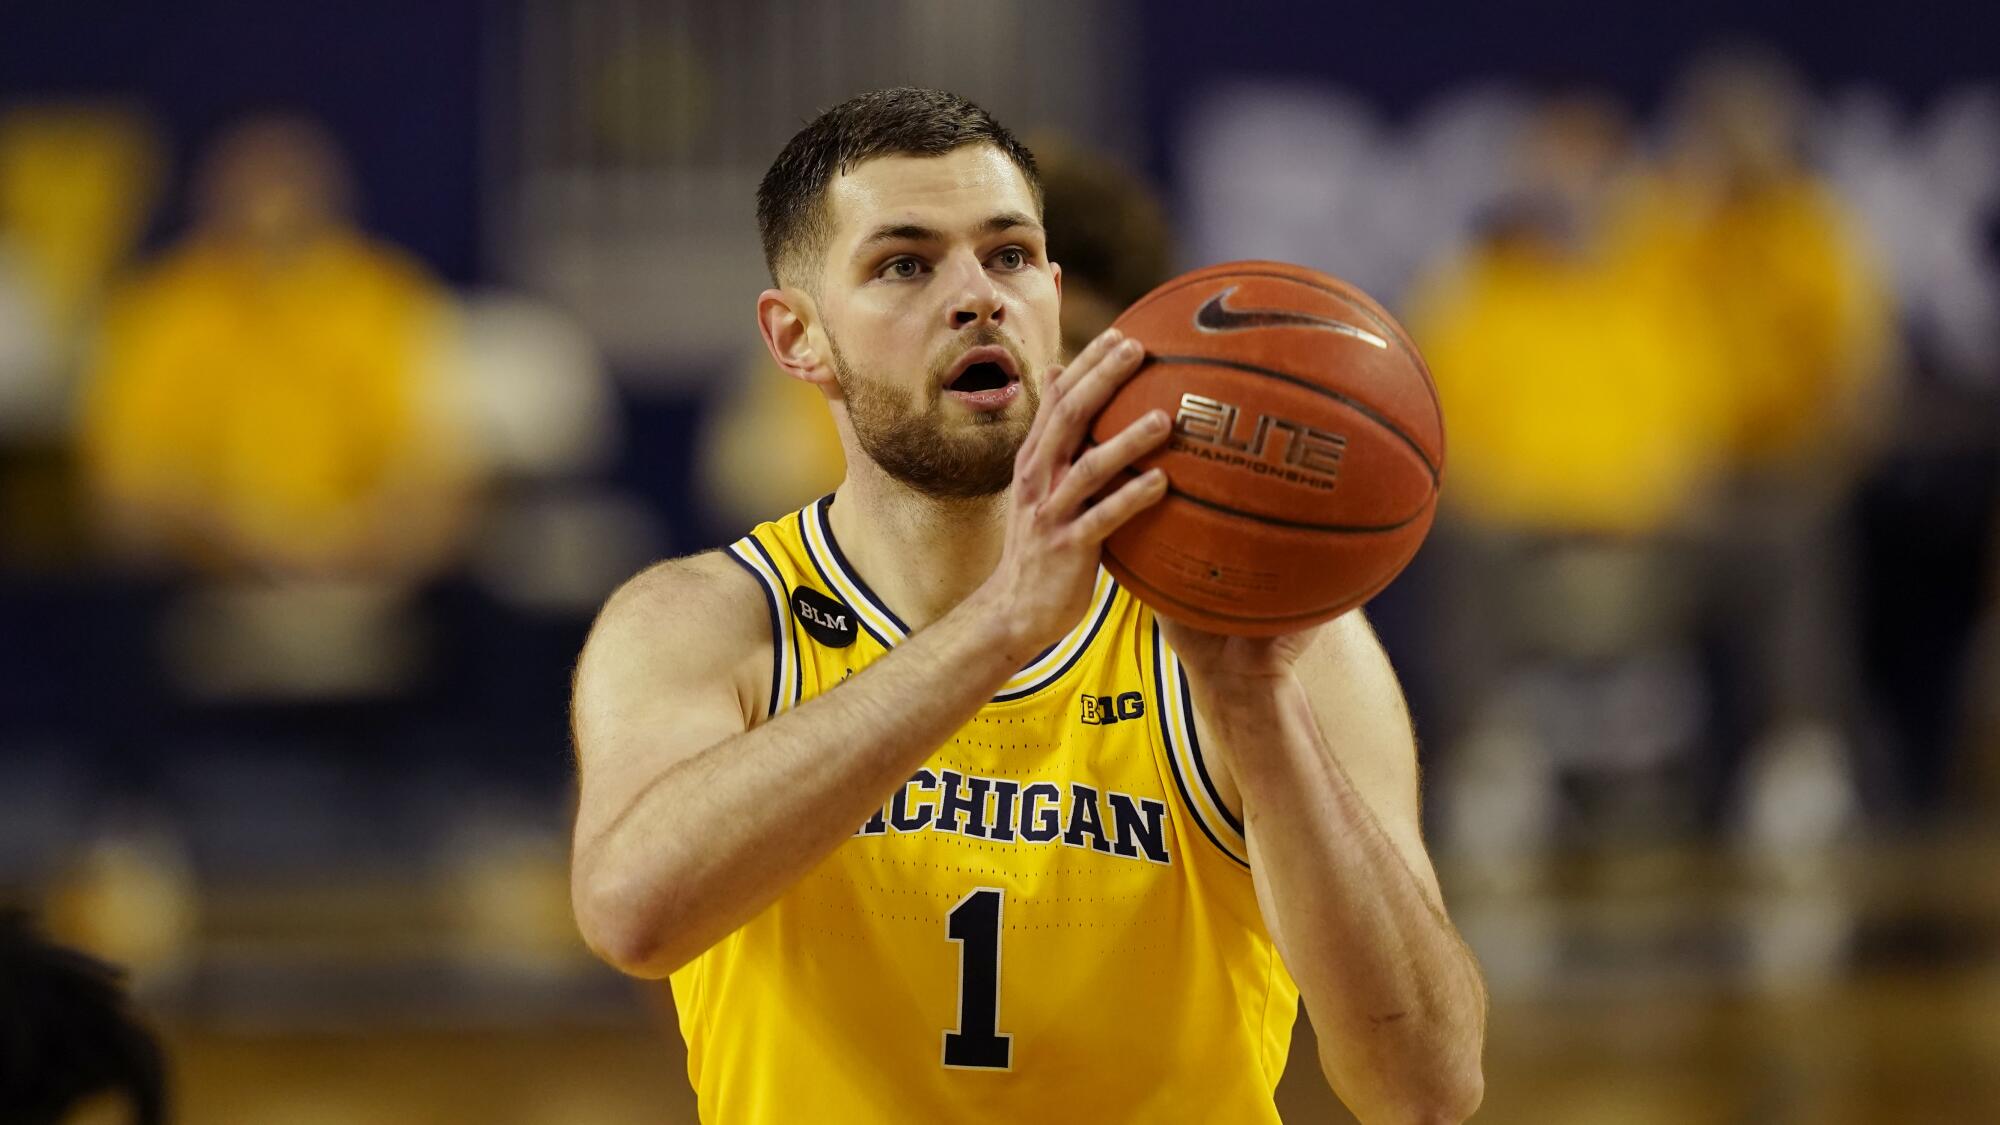 Michigan center Hunter Dickinson is one of the top players in college basketball.